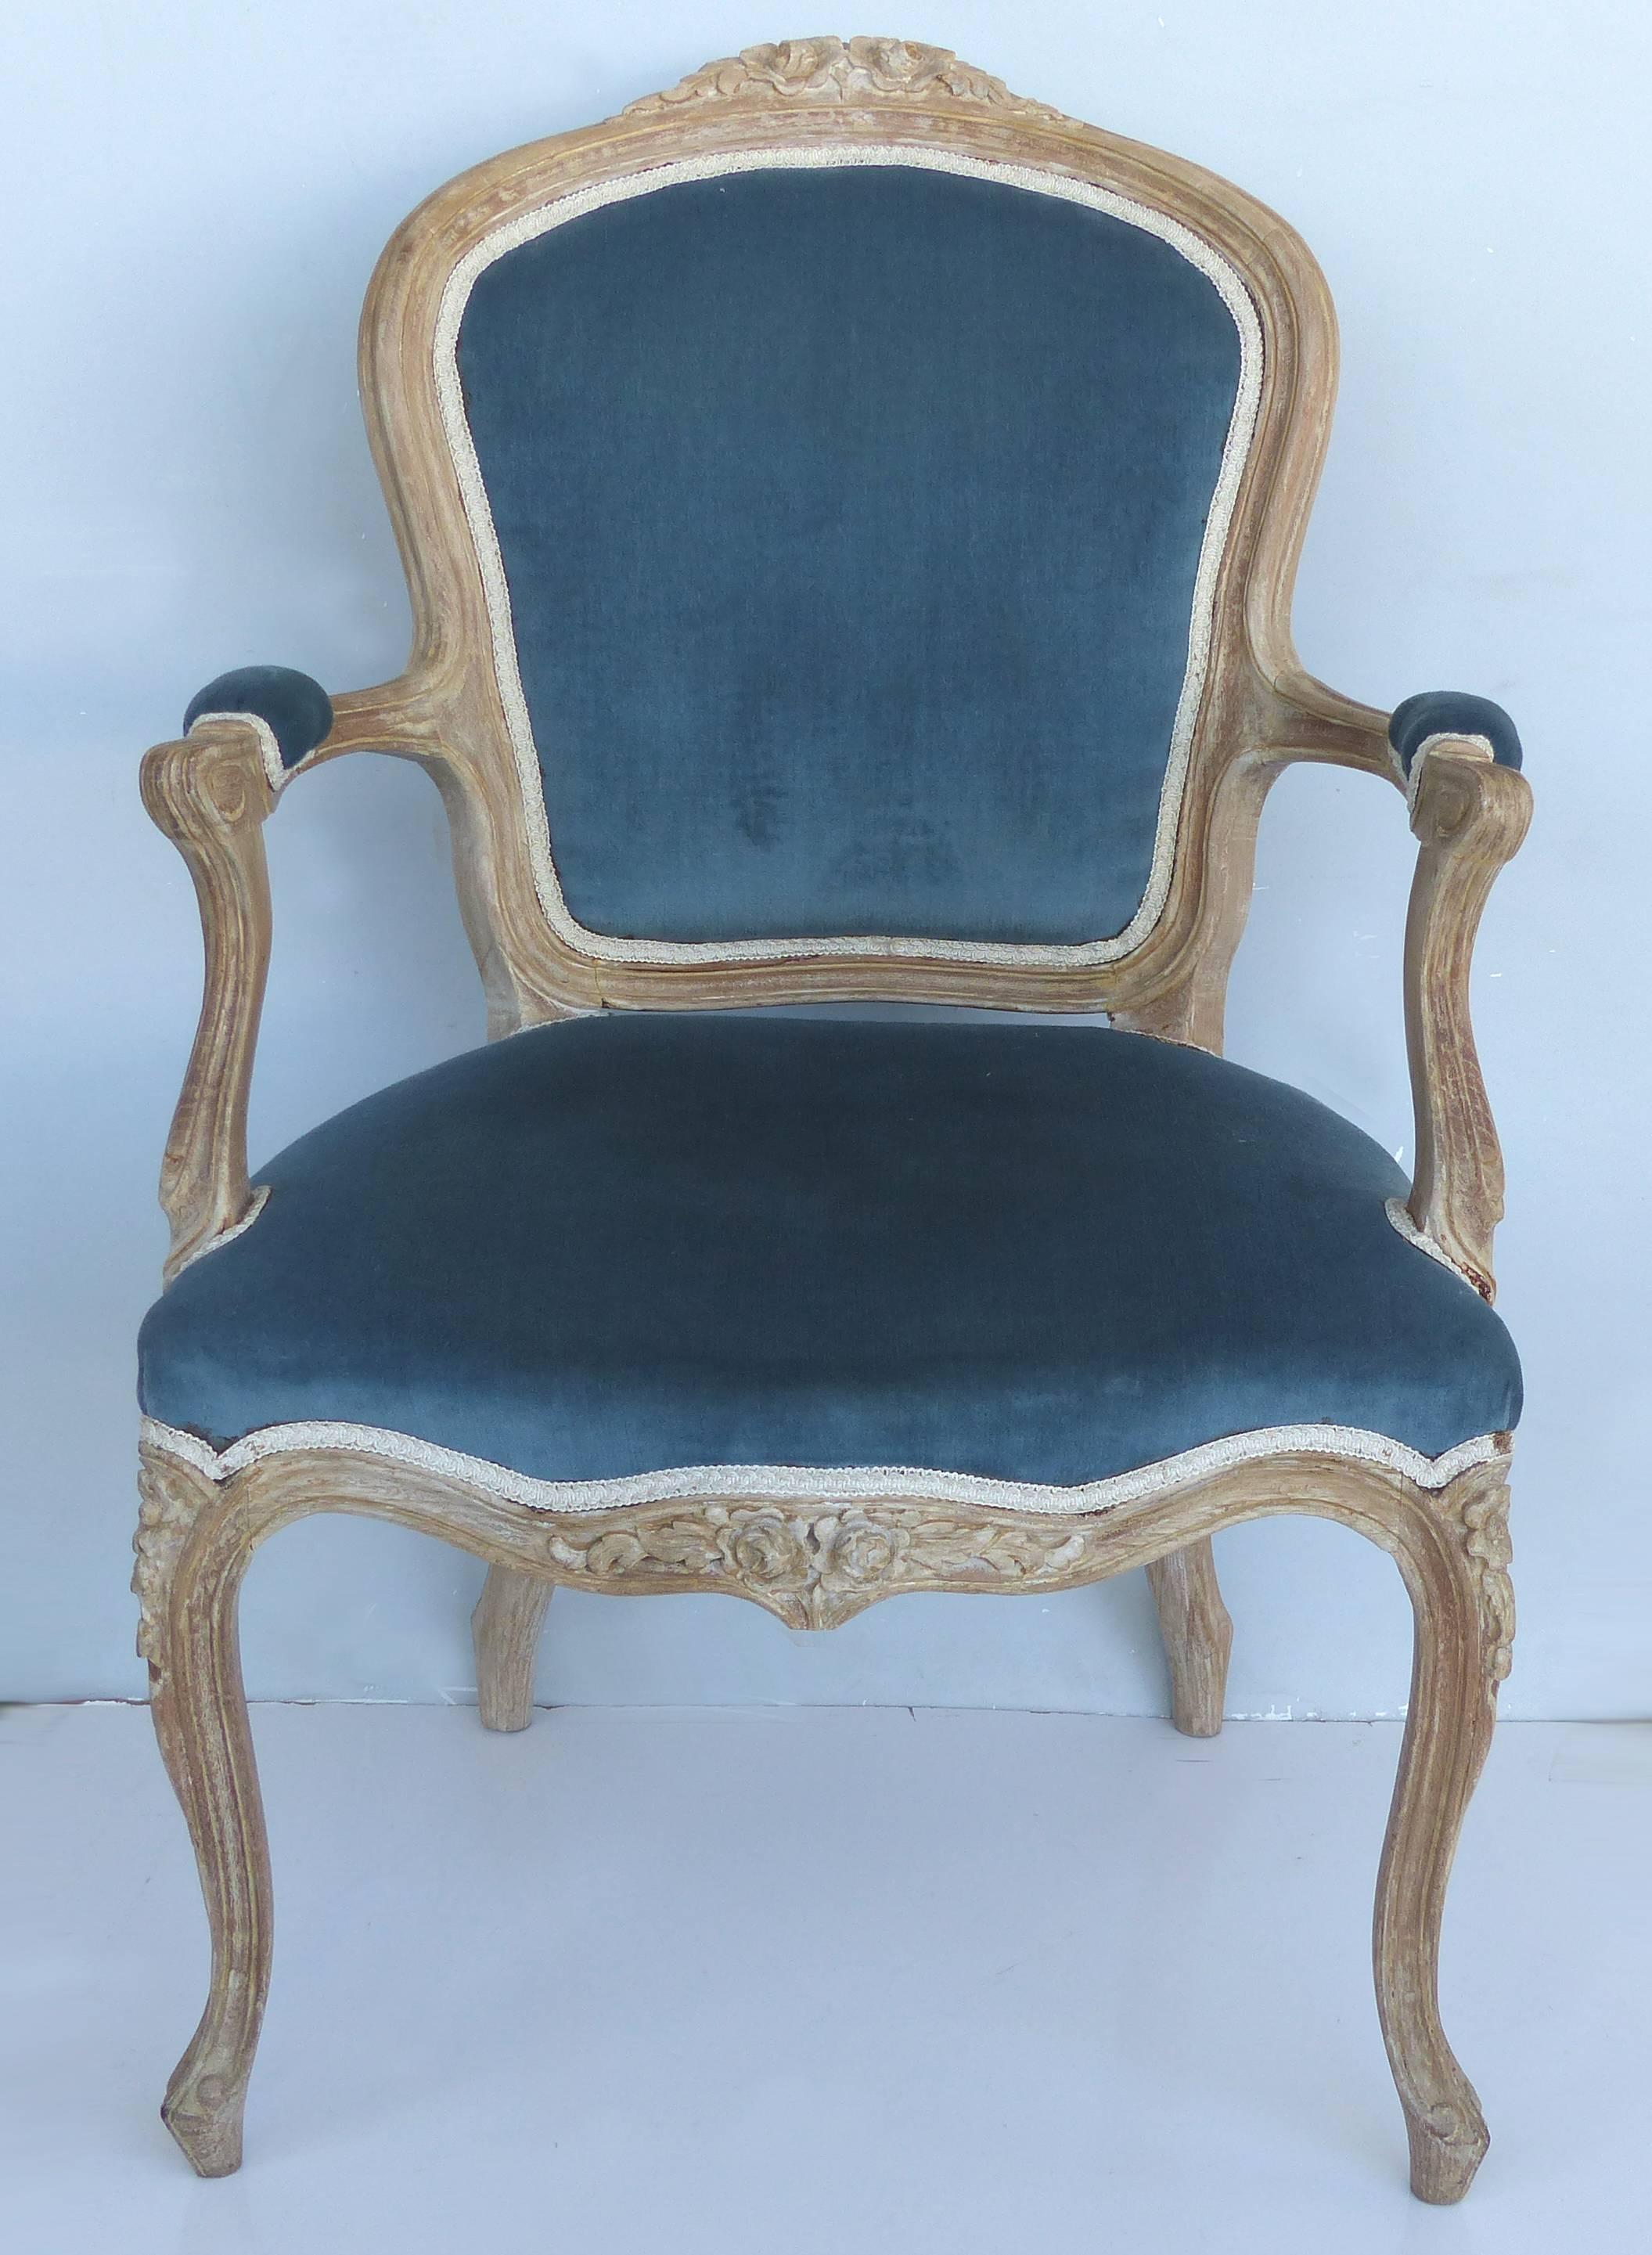 French Limed Louis XV Style Fauteuil Chairs with Velvet Mohair Seats with Trim

Offered for sale is an antique pair of French Louis XV style armchairs with a limed finish, upholstered seats in a Celeste blue velvet mohair upholstery with